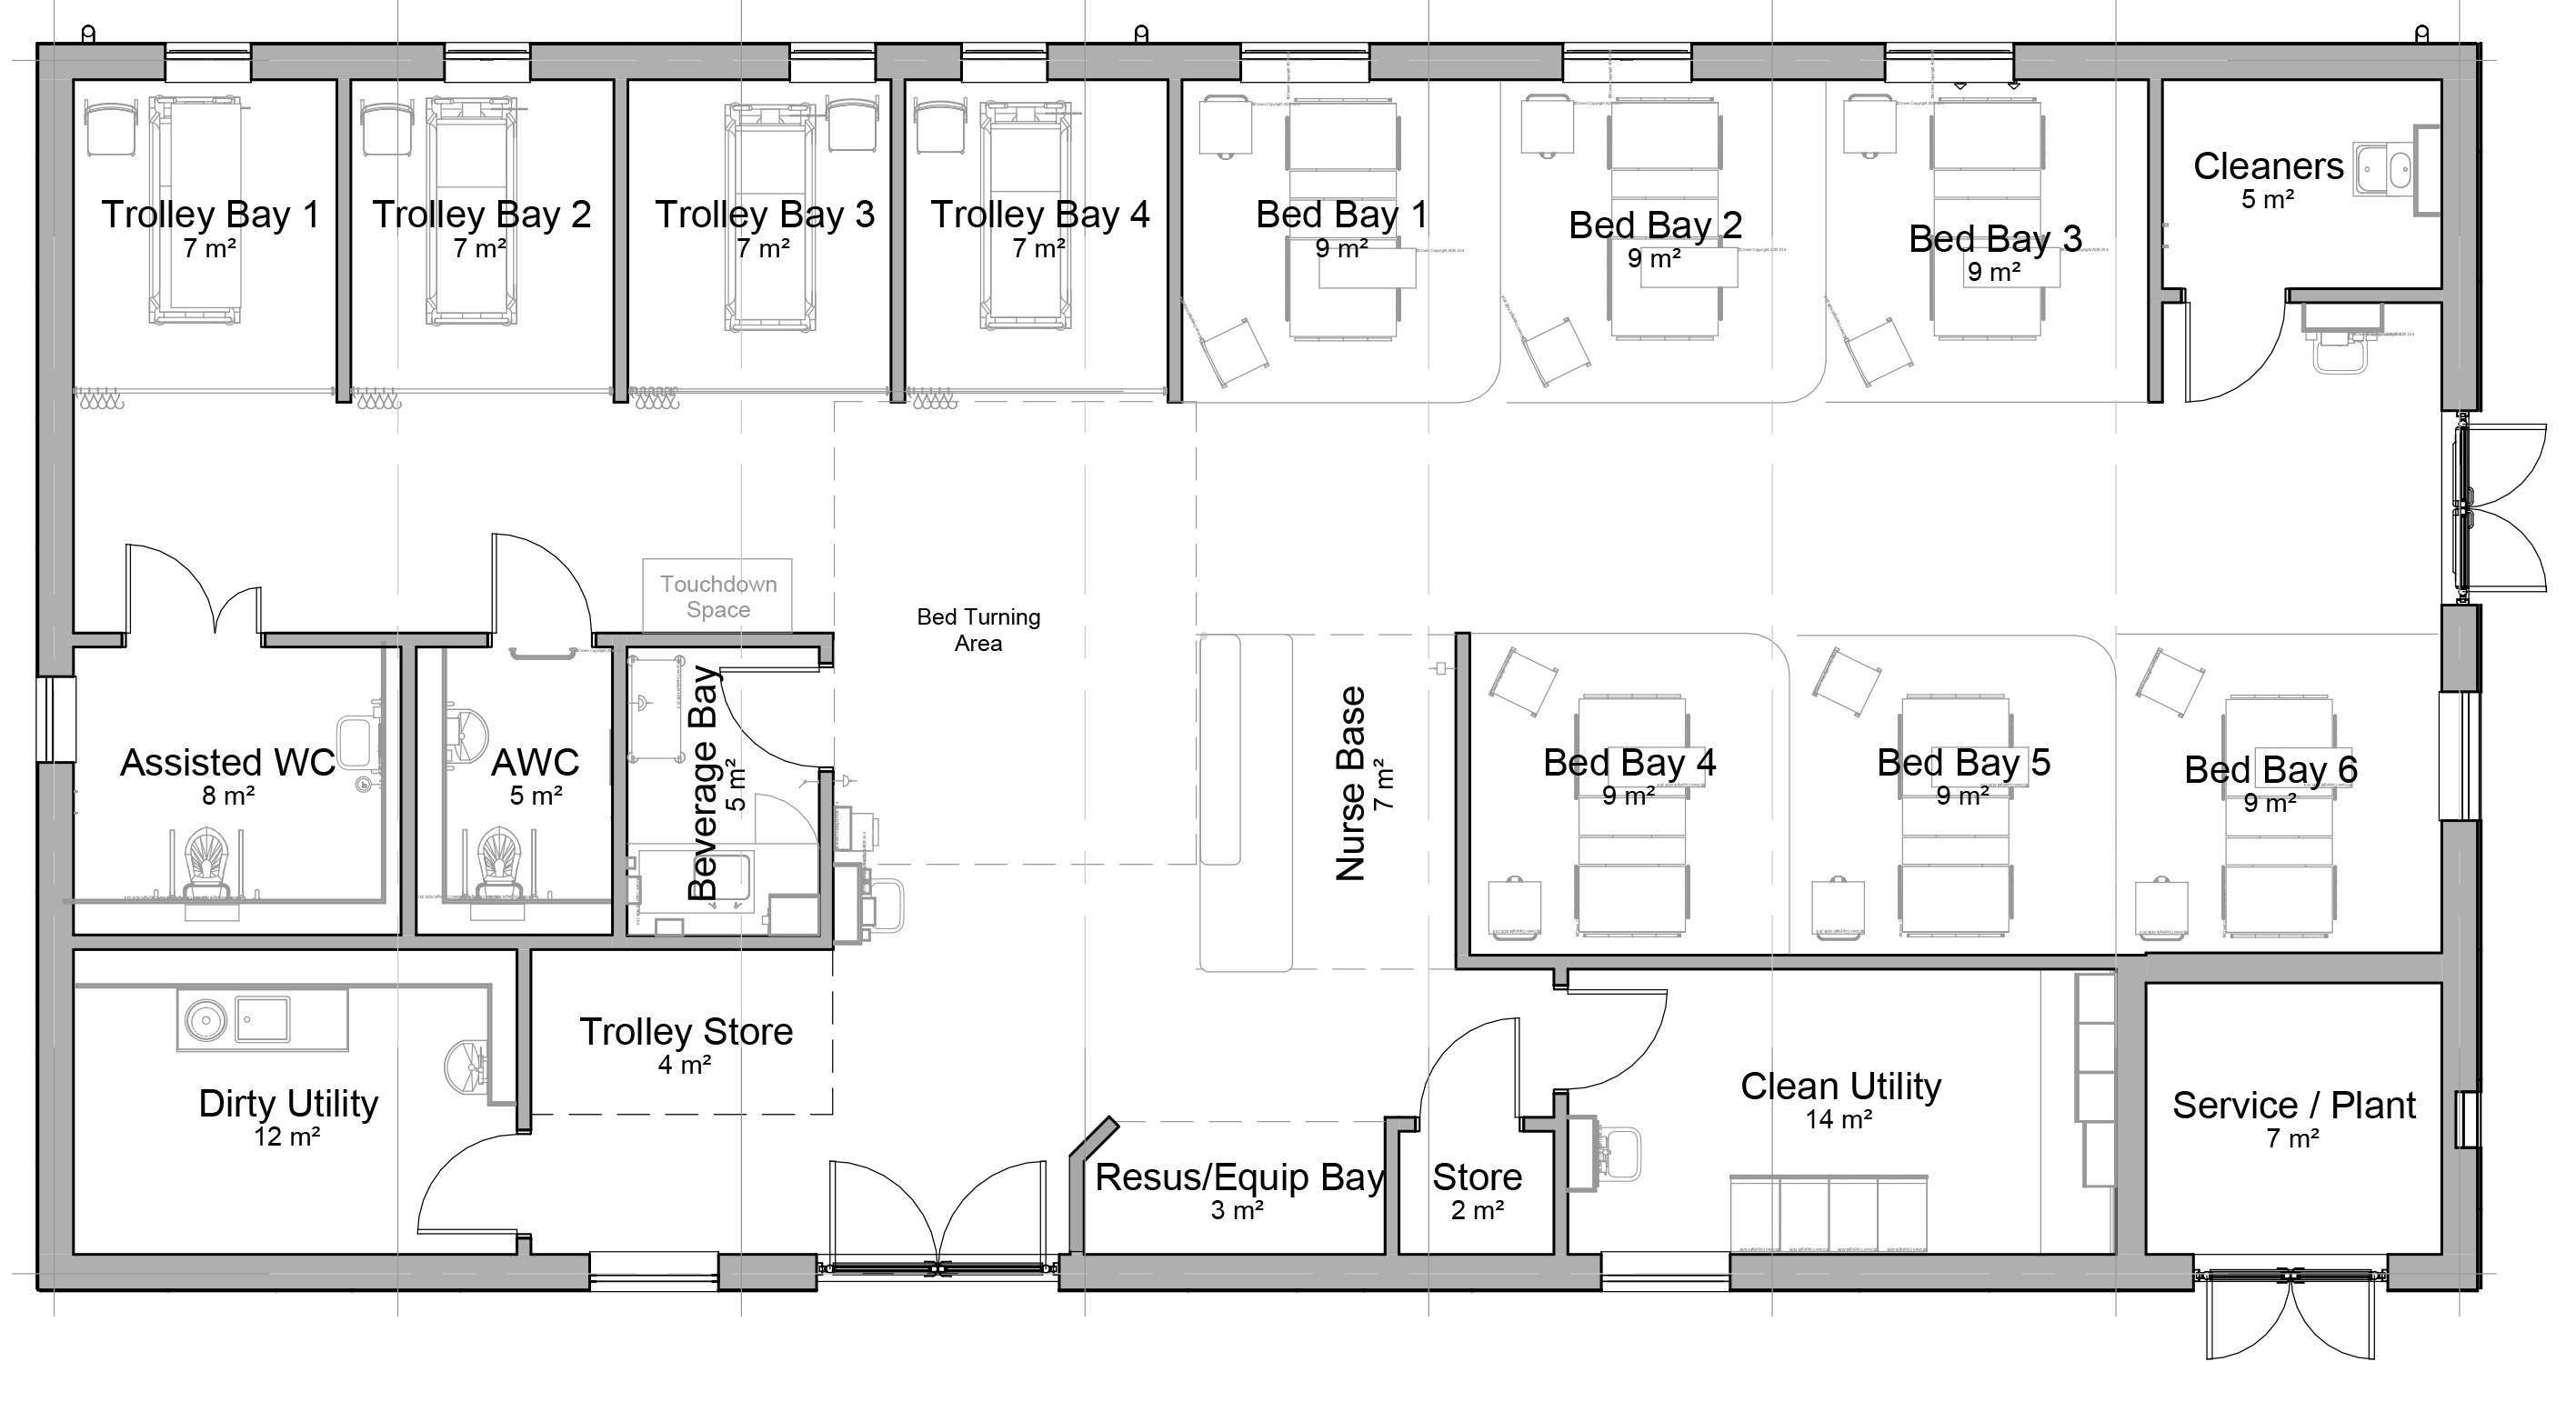 A technical drawing of the building layout, shown from overhead.